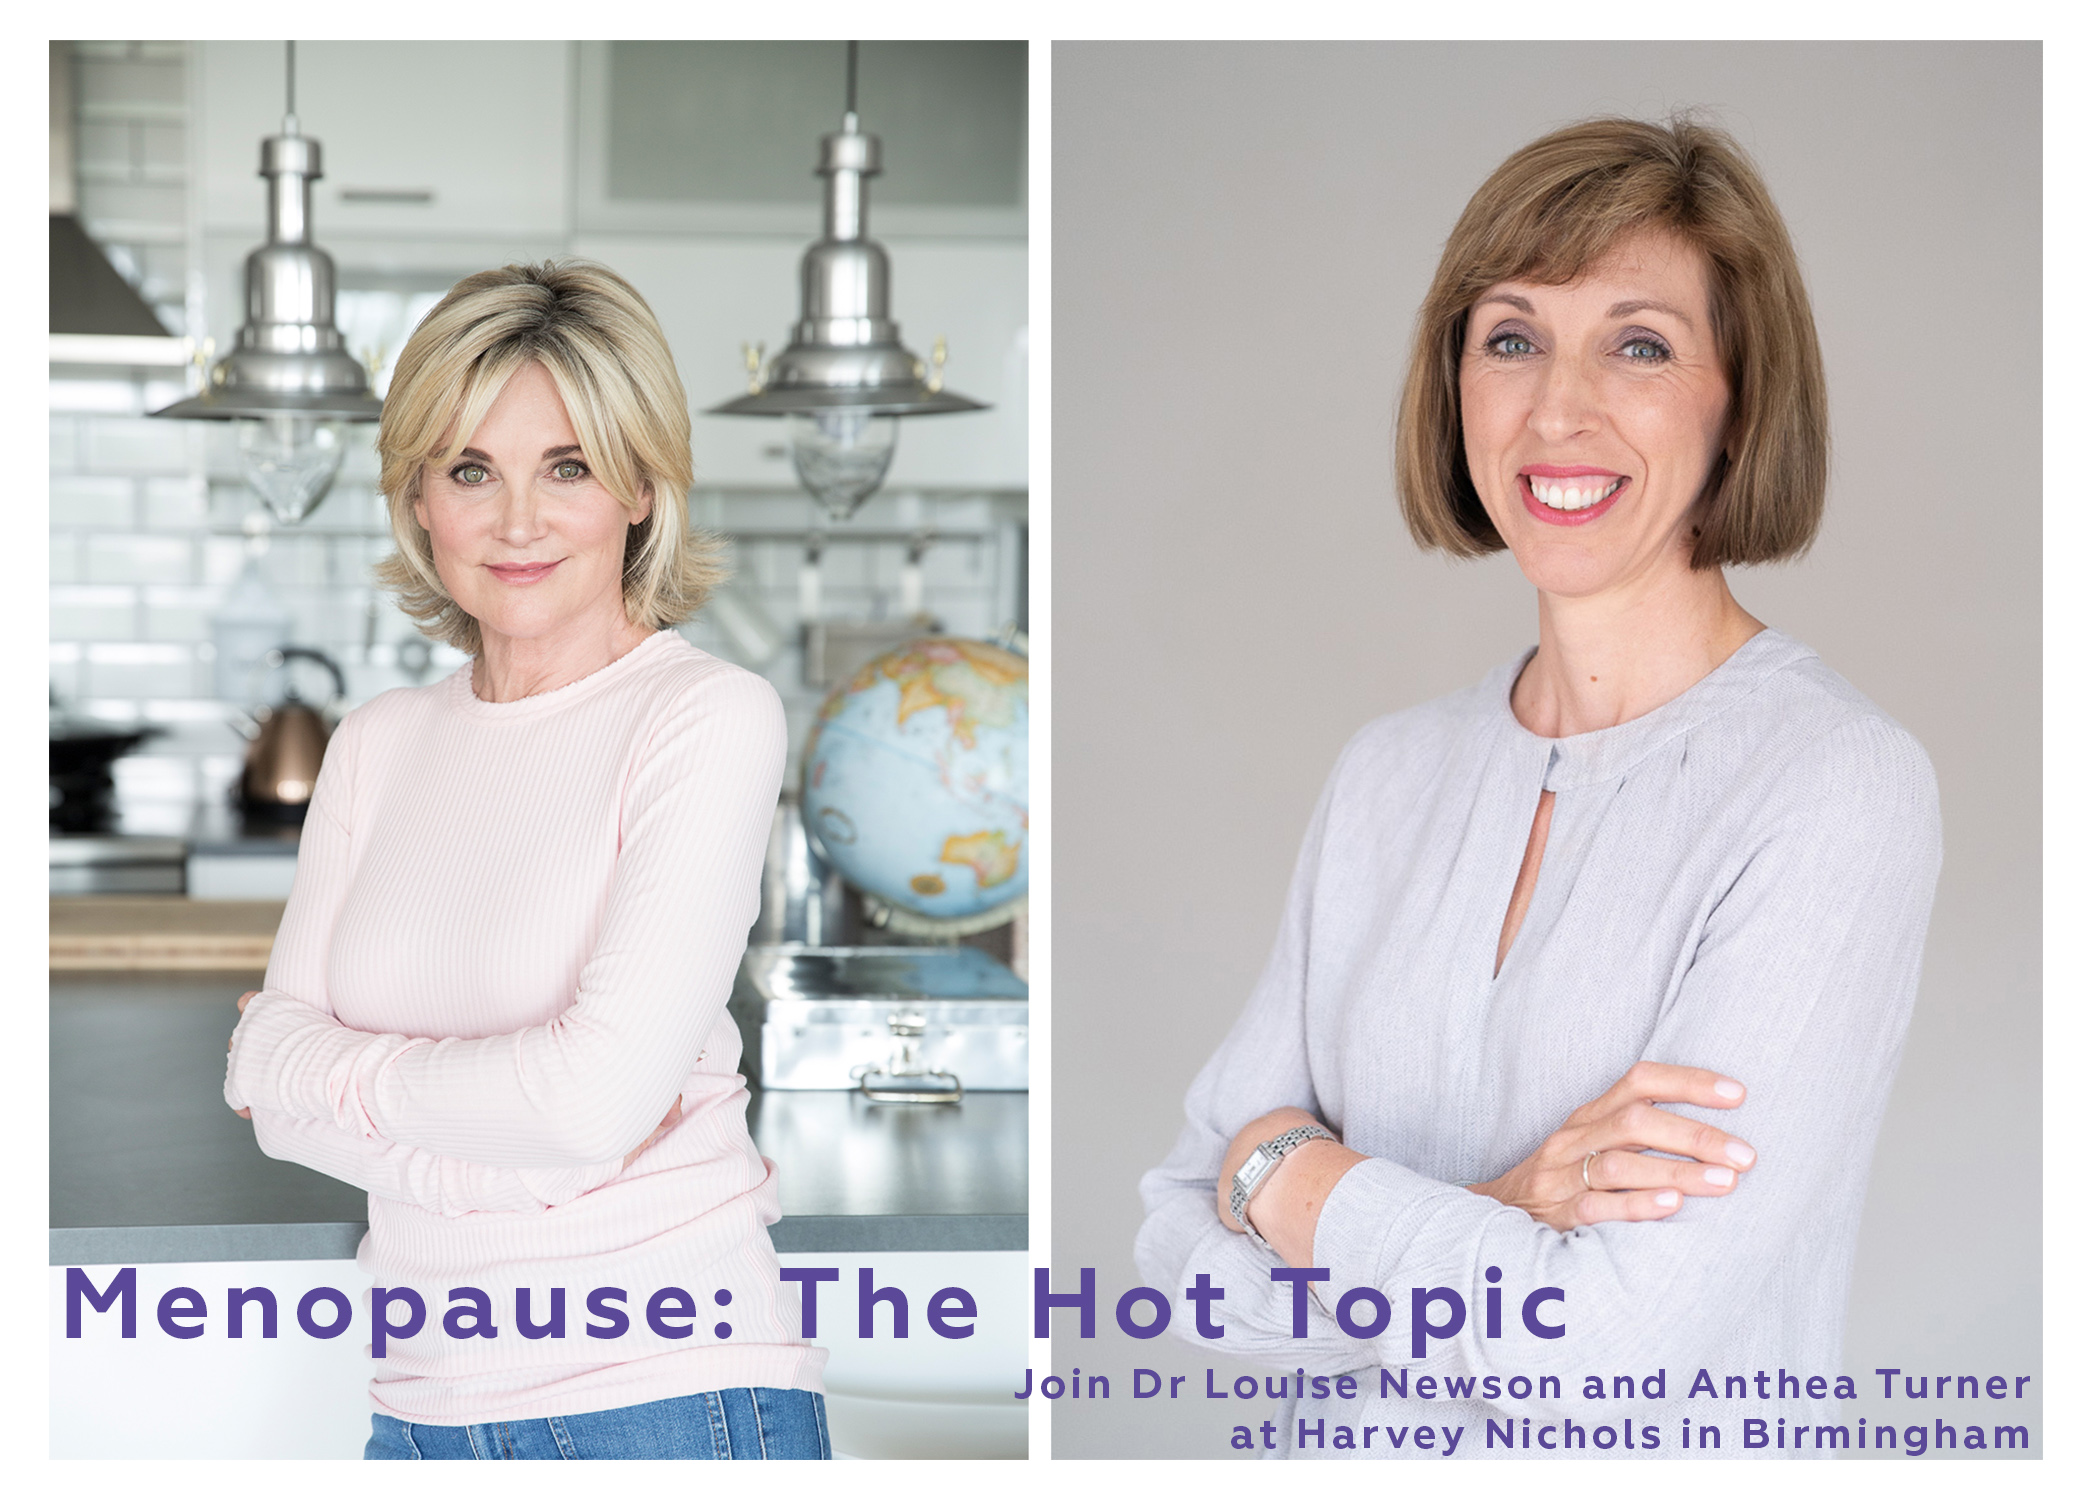 Menopause: The Hot Topic